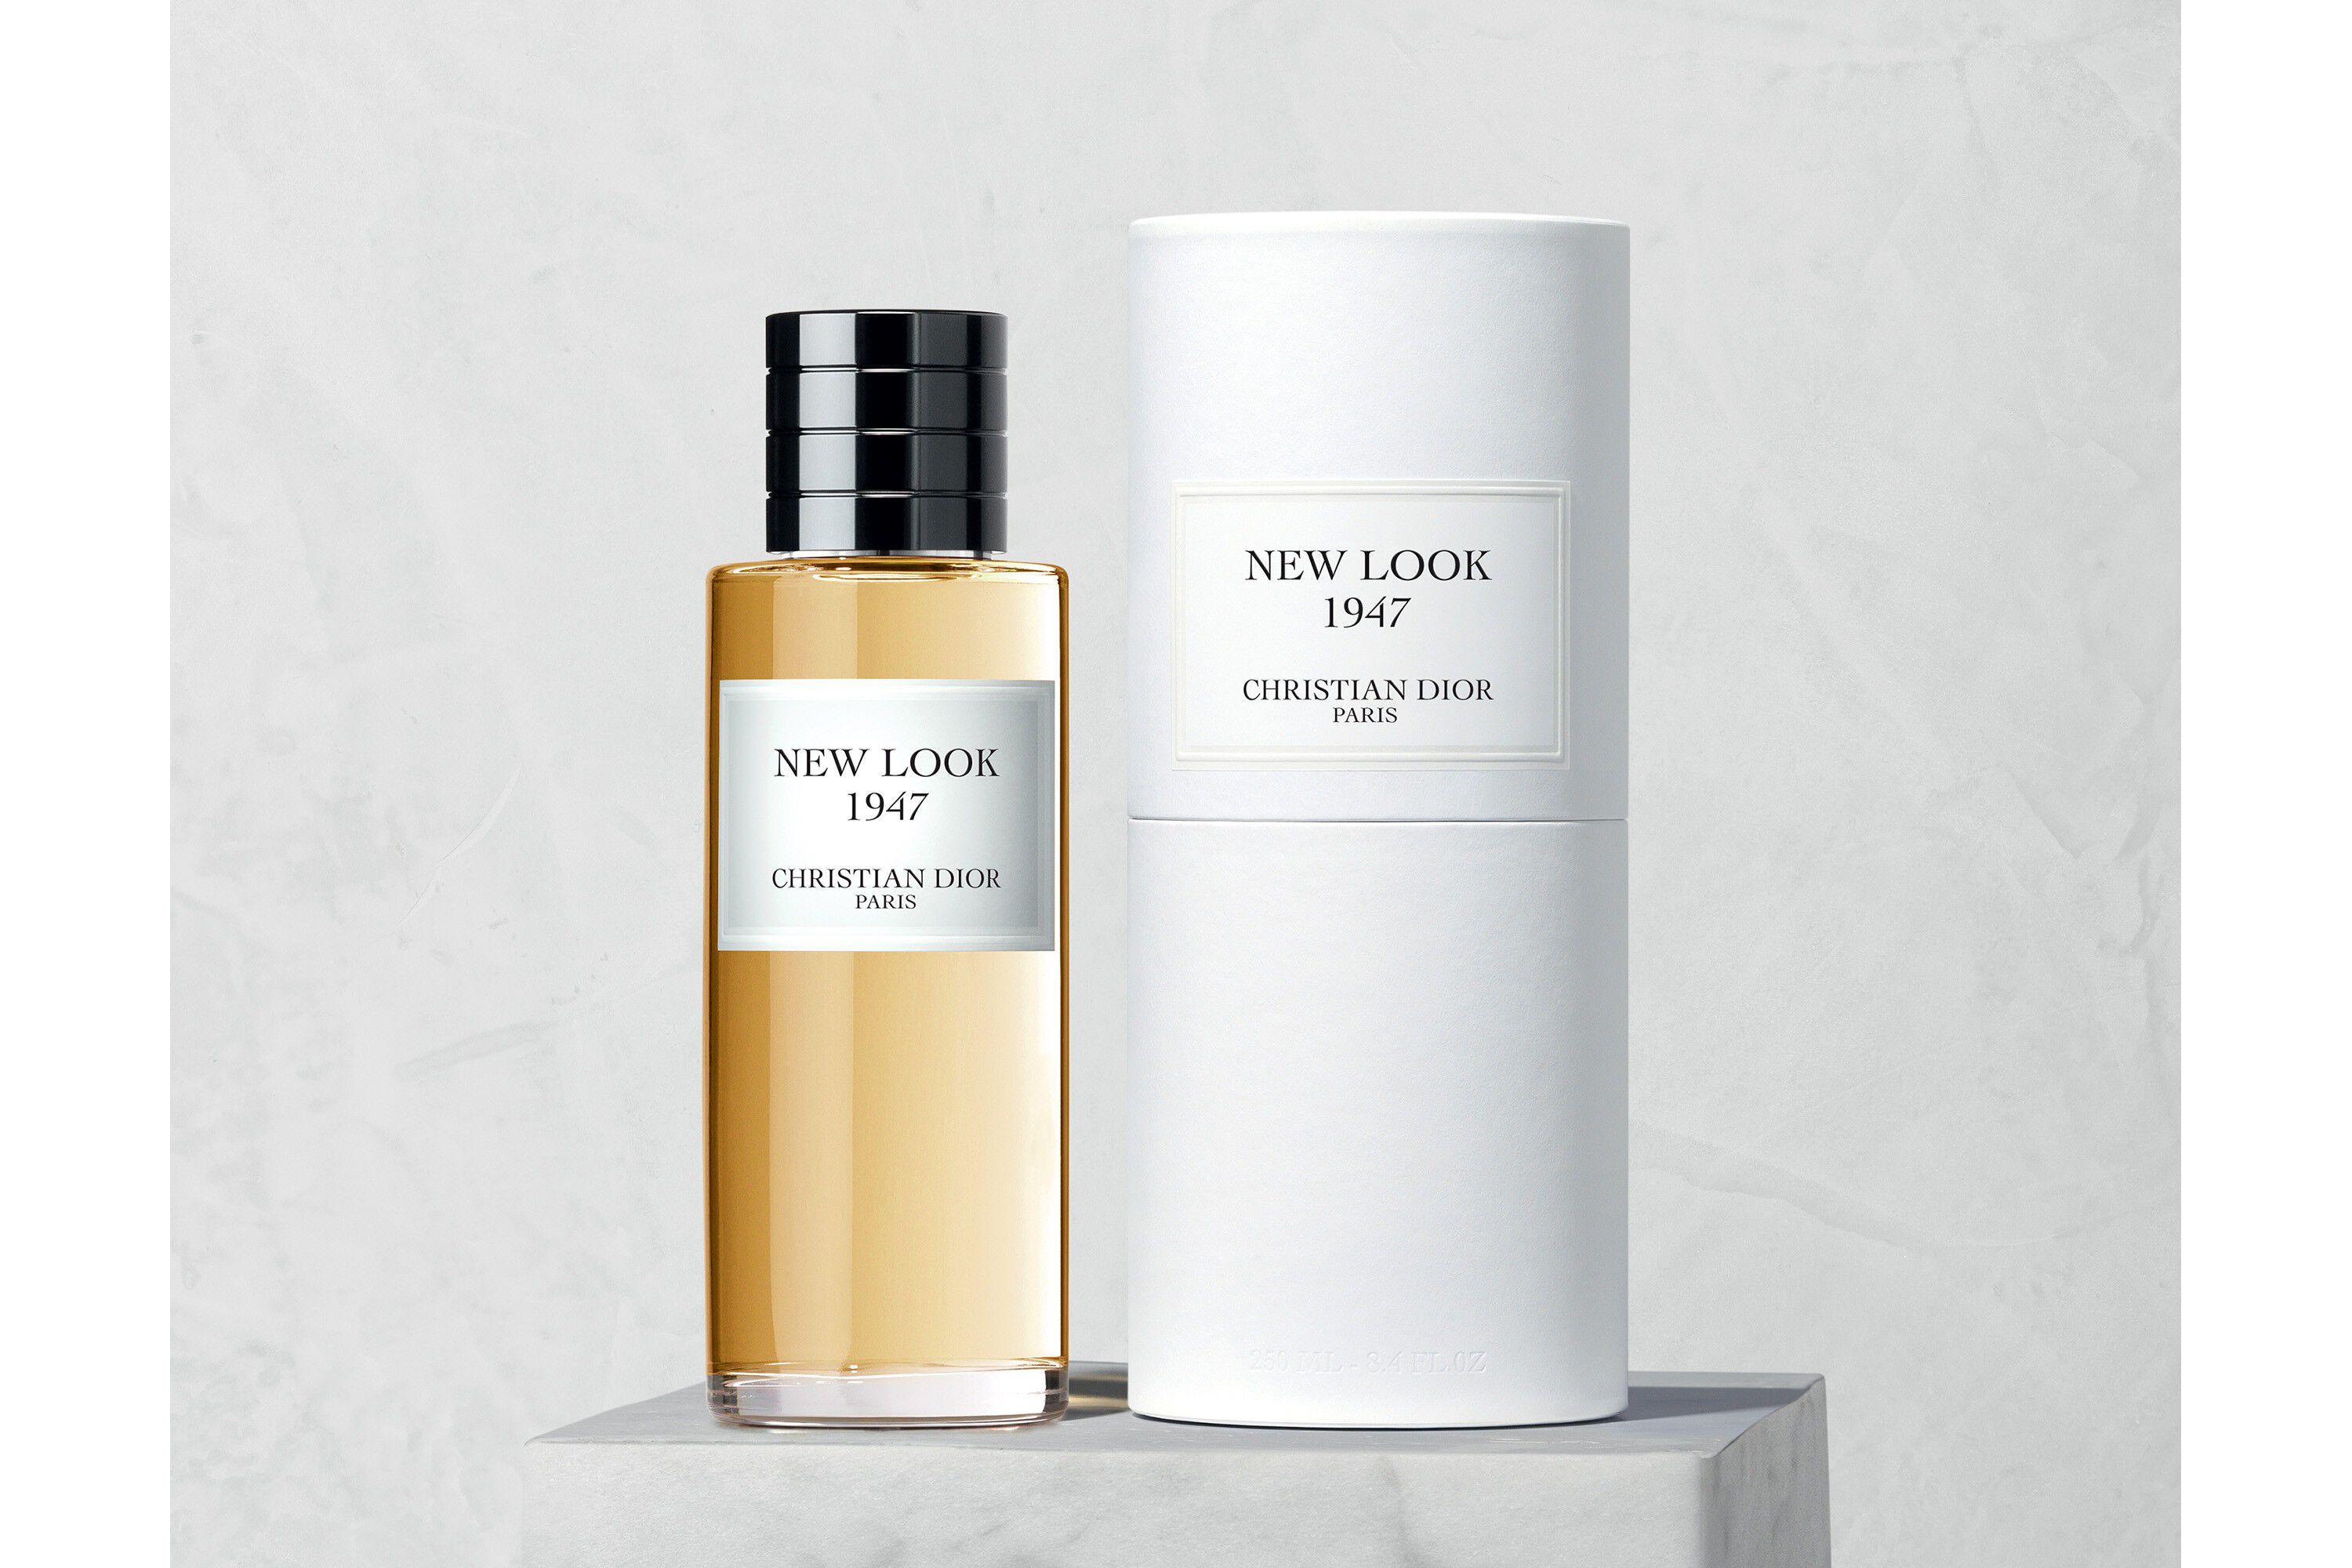 Ineenstorting verzekering Rijk New Look 1947 Fragrance: An Echo of the Birth of Dior Couture | DIOR